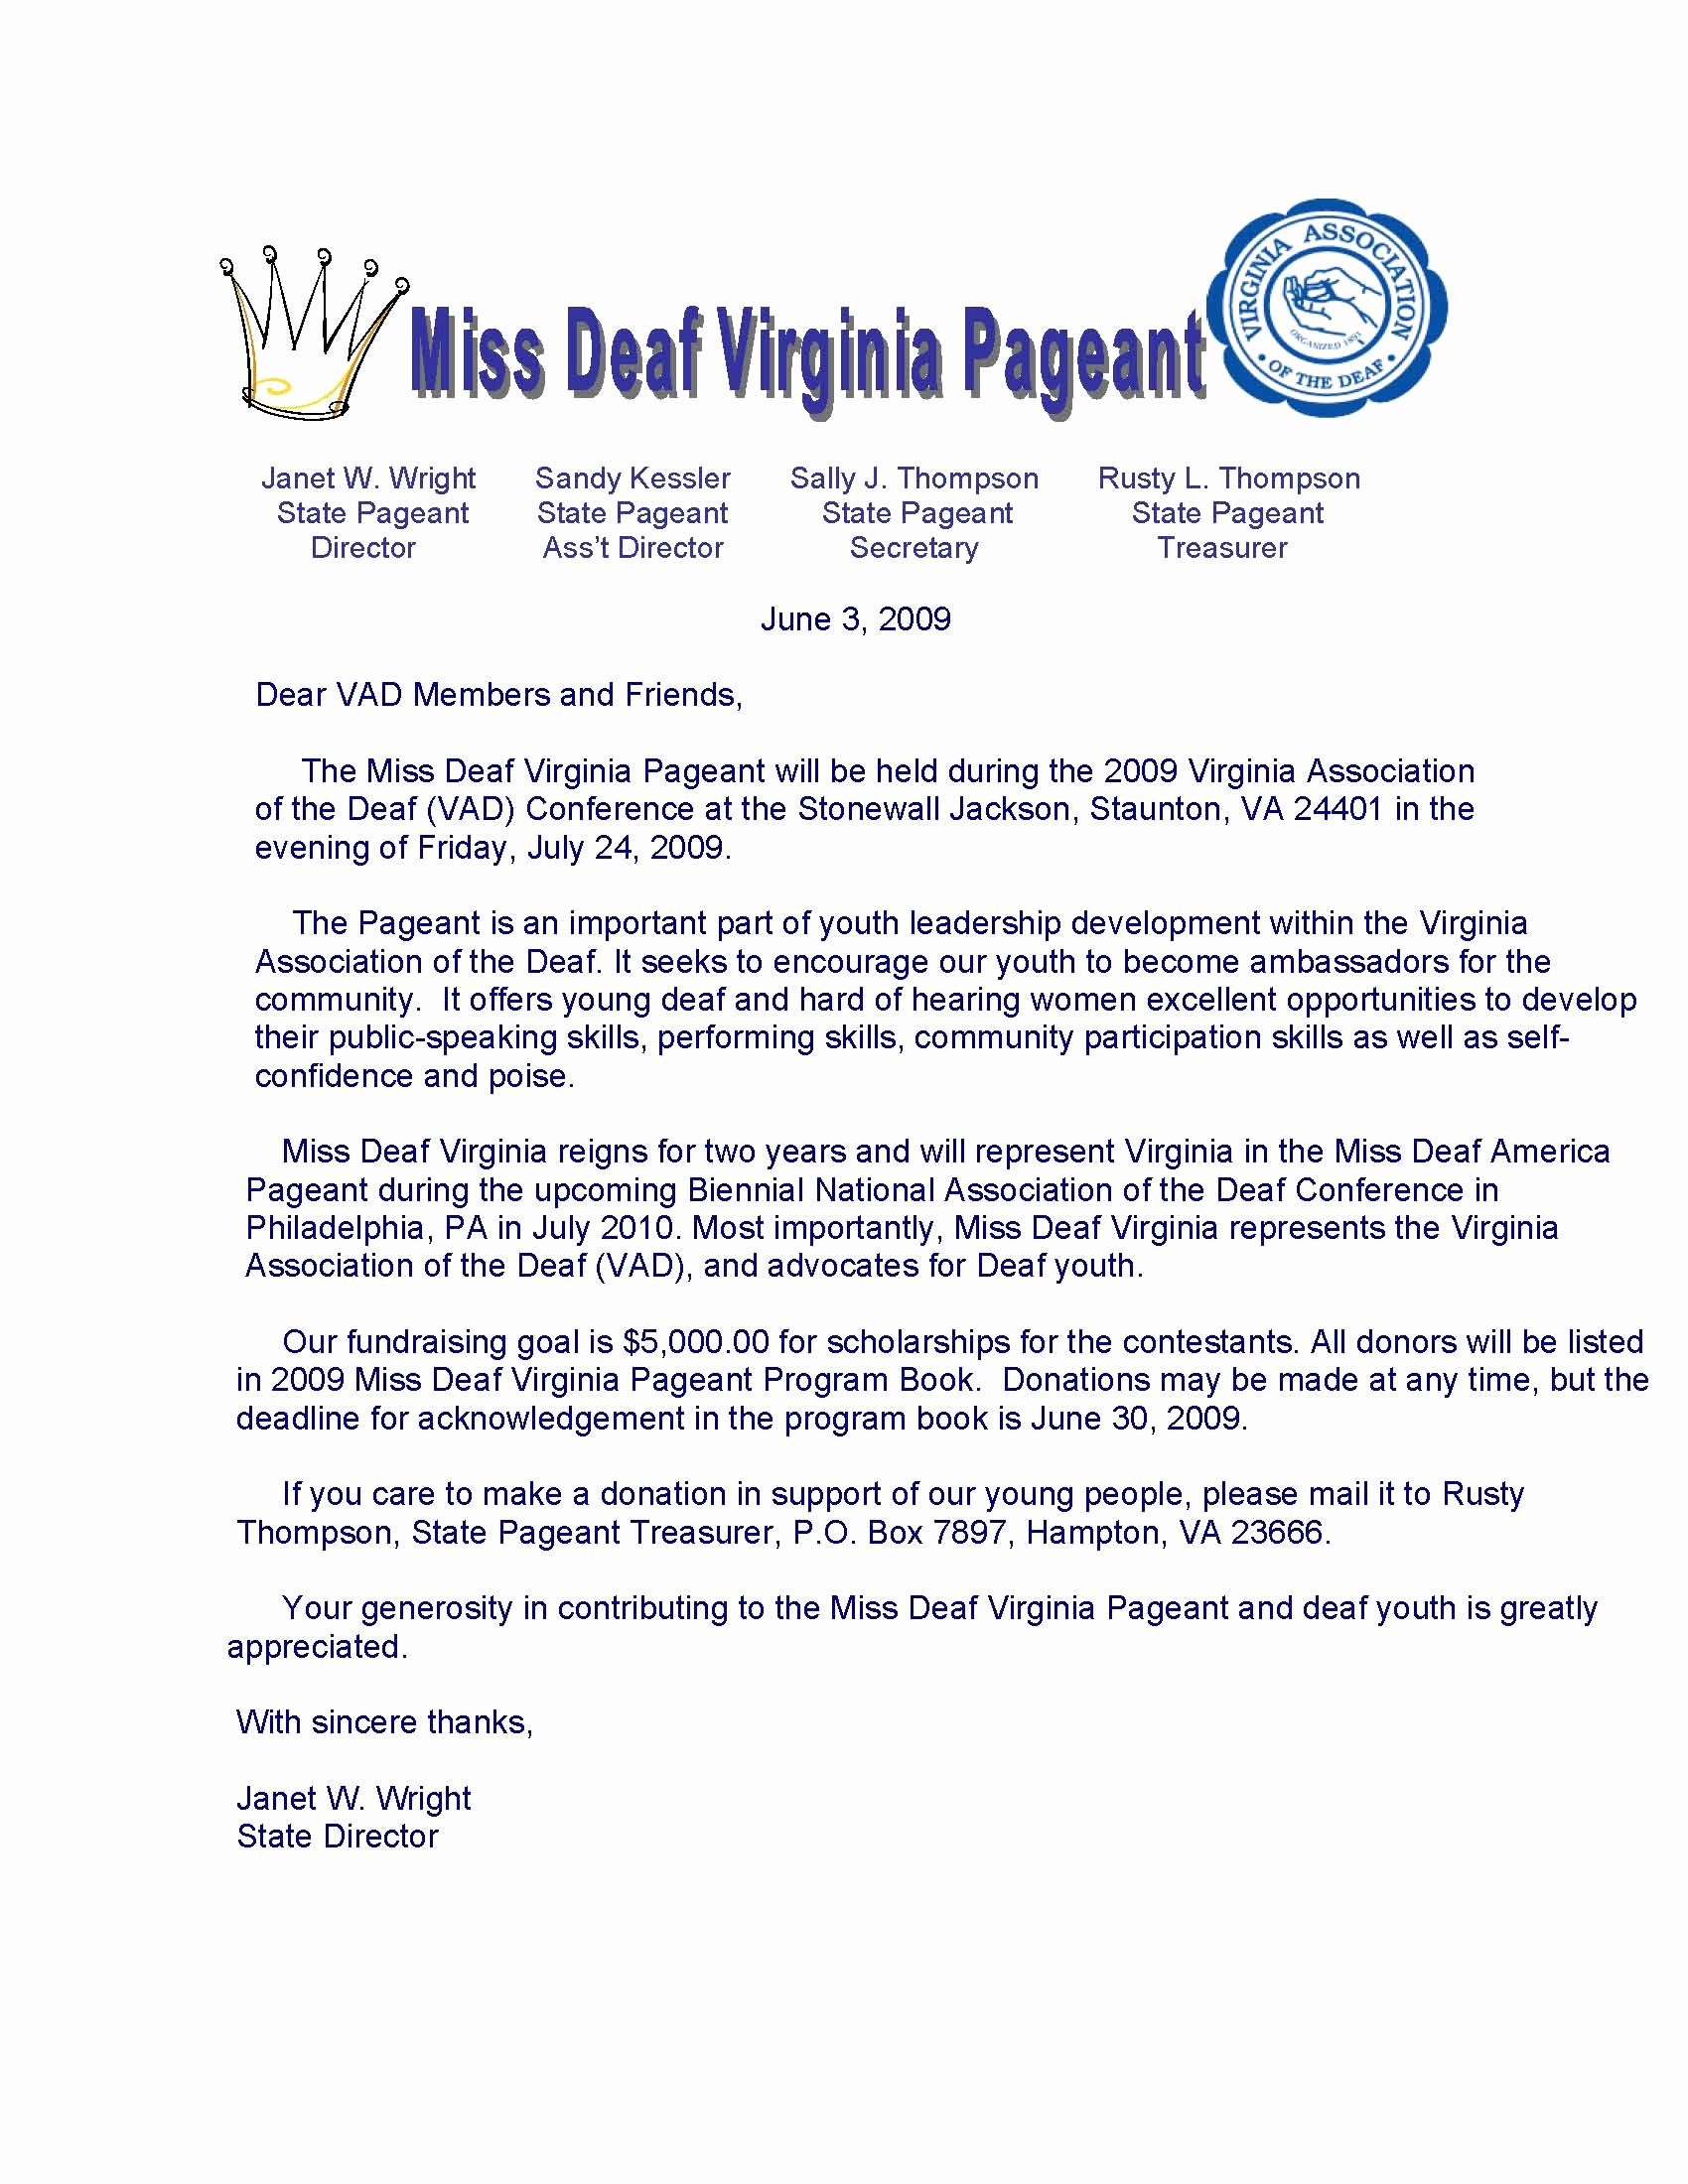 Request for Donations Letter Unique Donation Request for Miss Deaf Virginia Pageant Deaf and